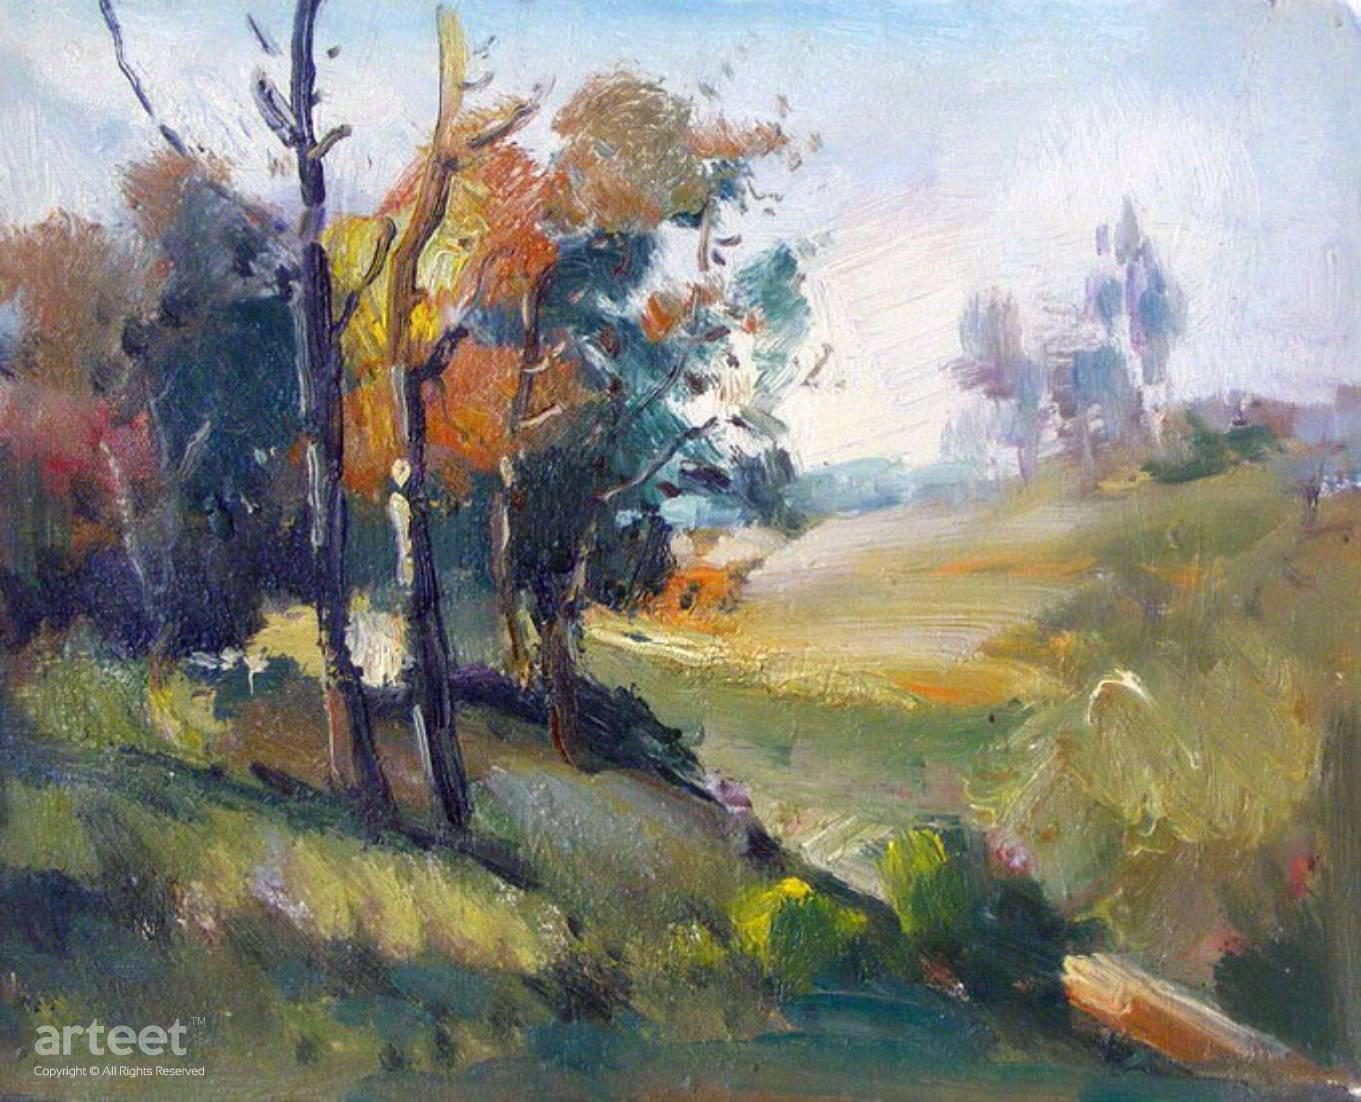 Impressionist Landscape Art Paintings For Sale Online Gallery